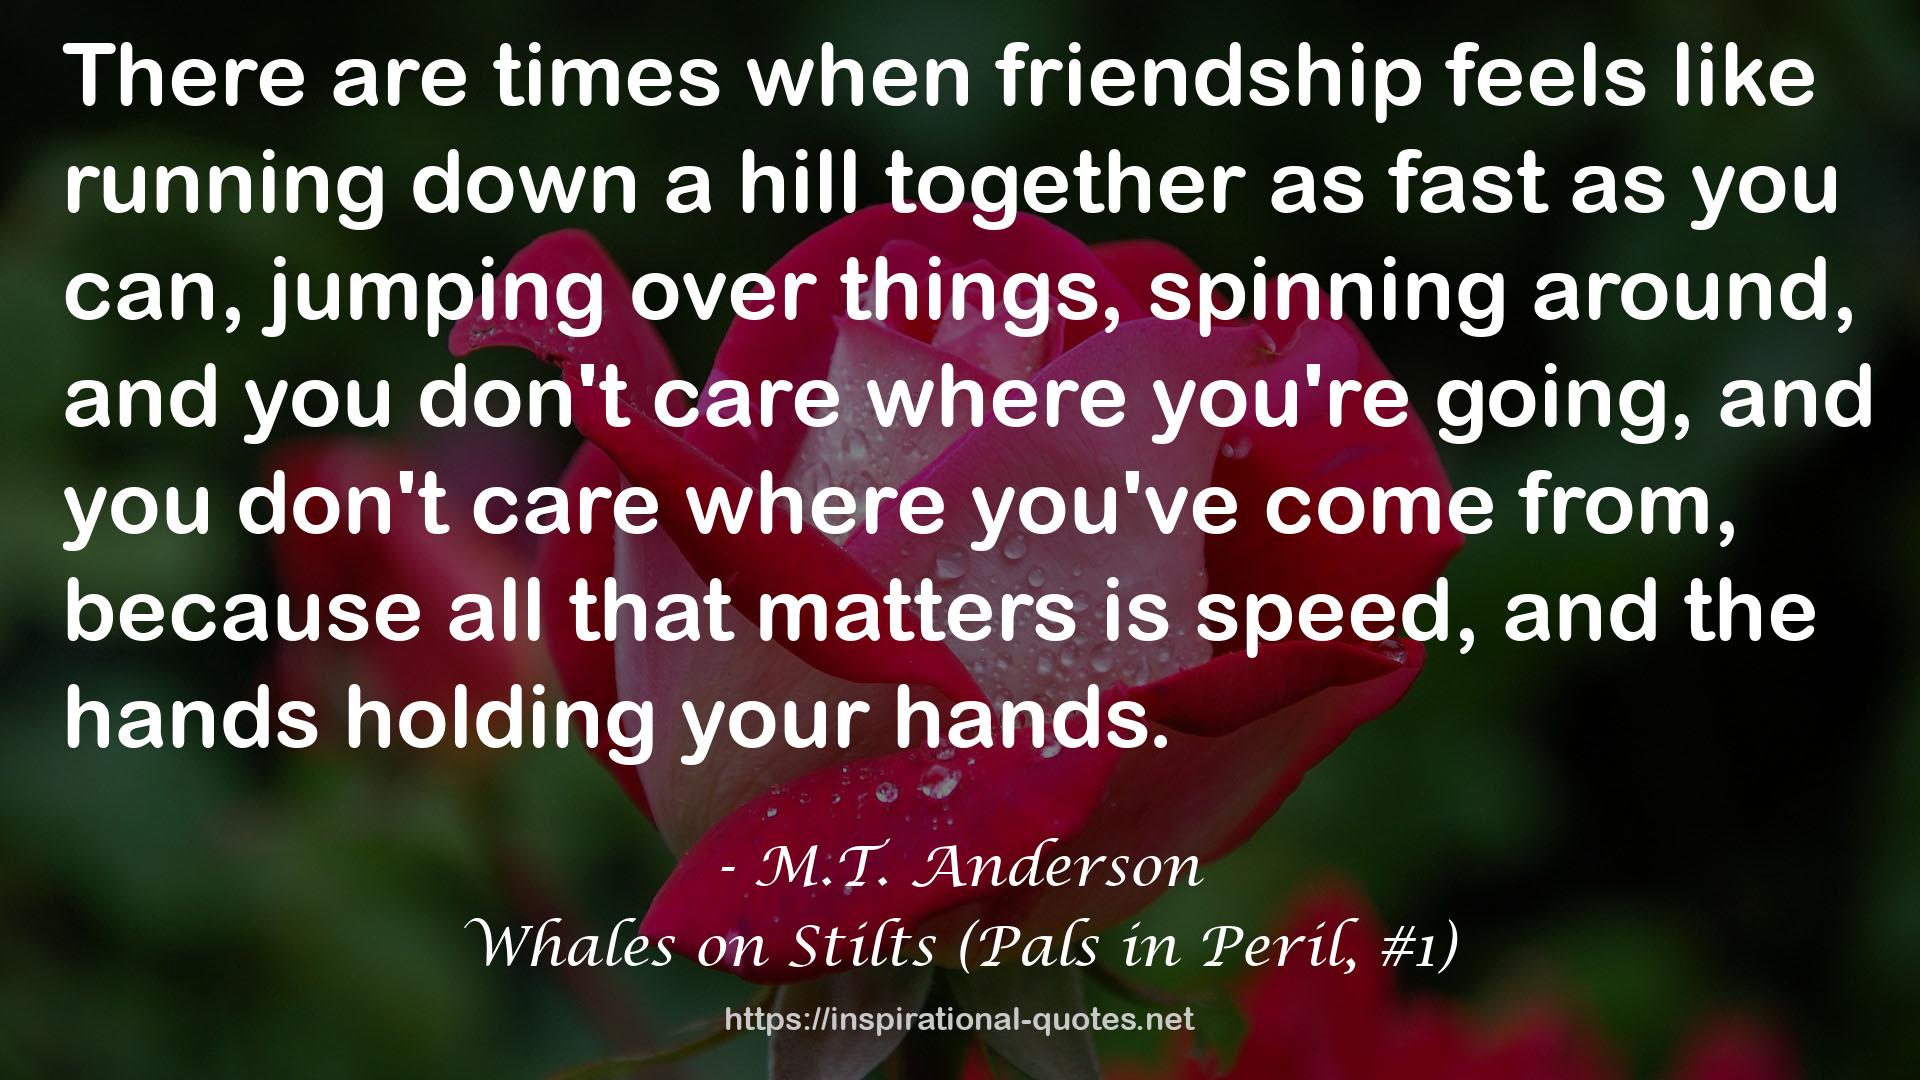 Whales on Stilts (Pals in Peril, #1) QUOTES